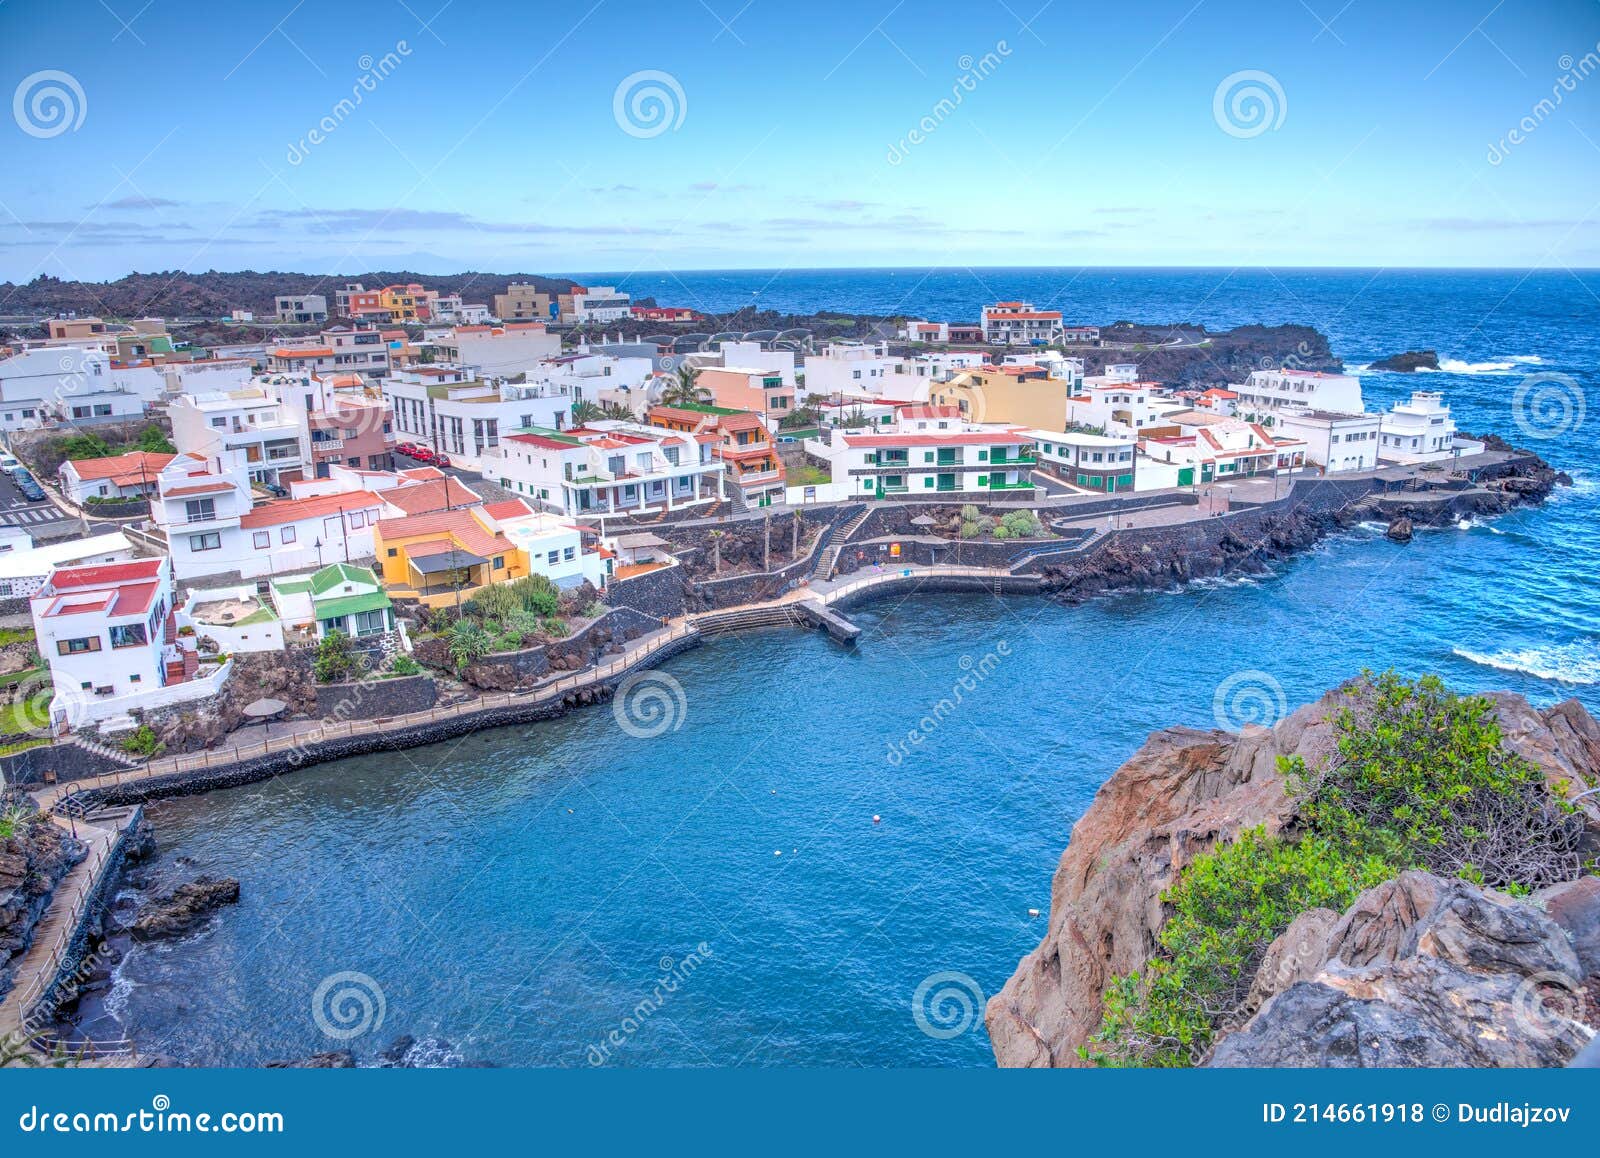 tamaduste village situated on shore of el hierro island at canary islands, spain